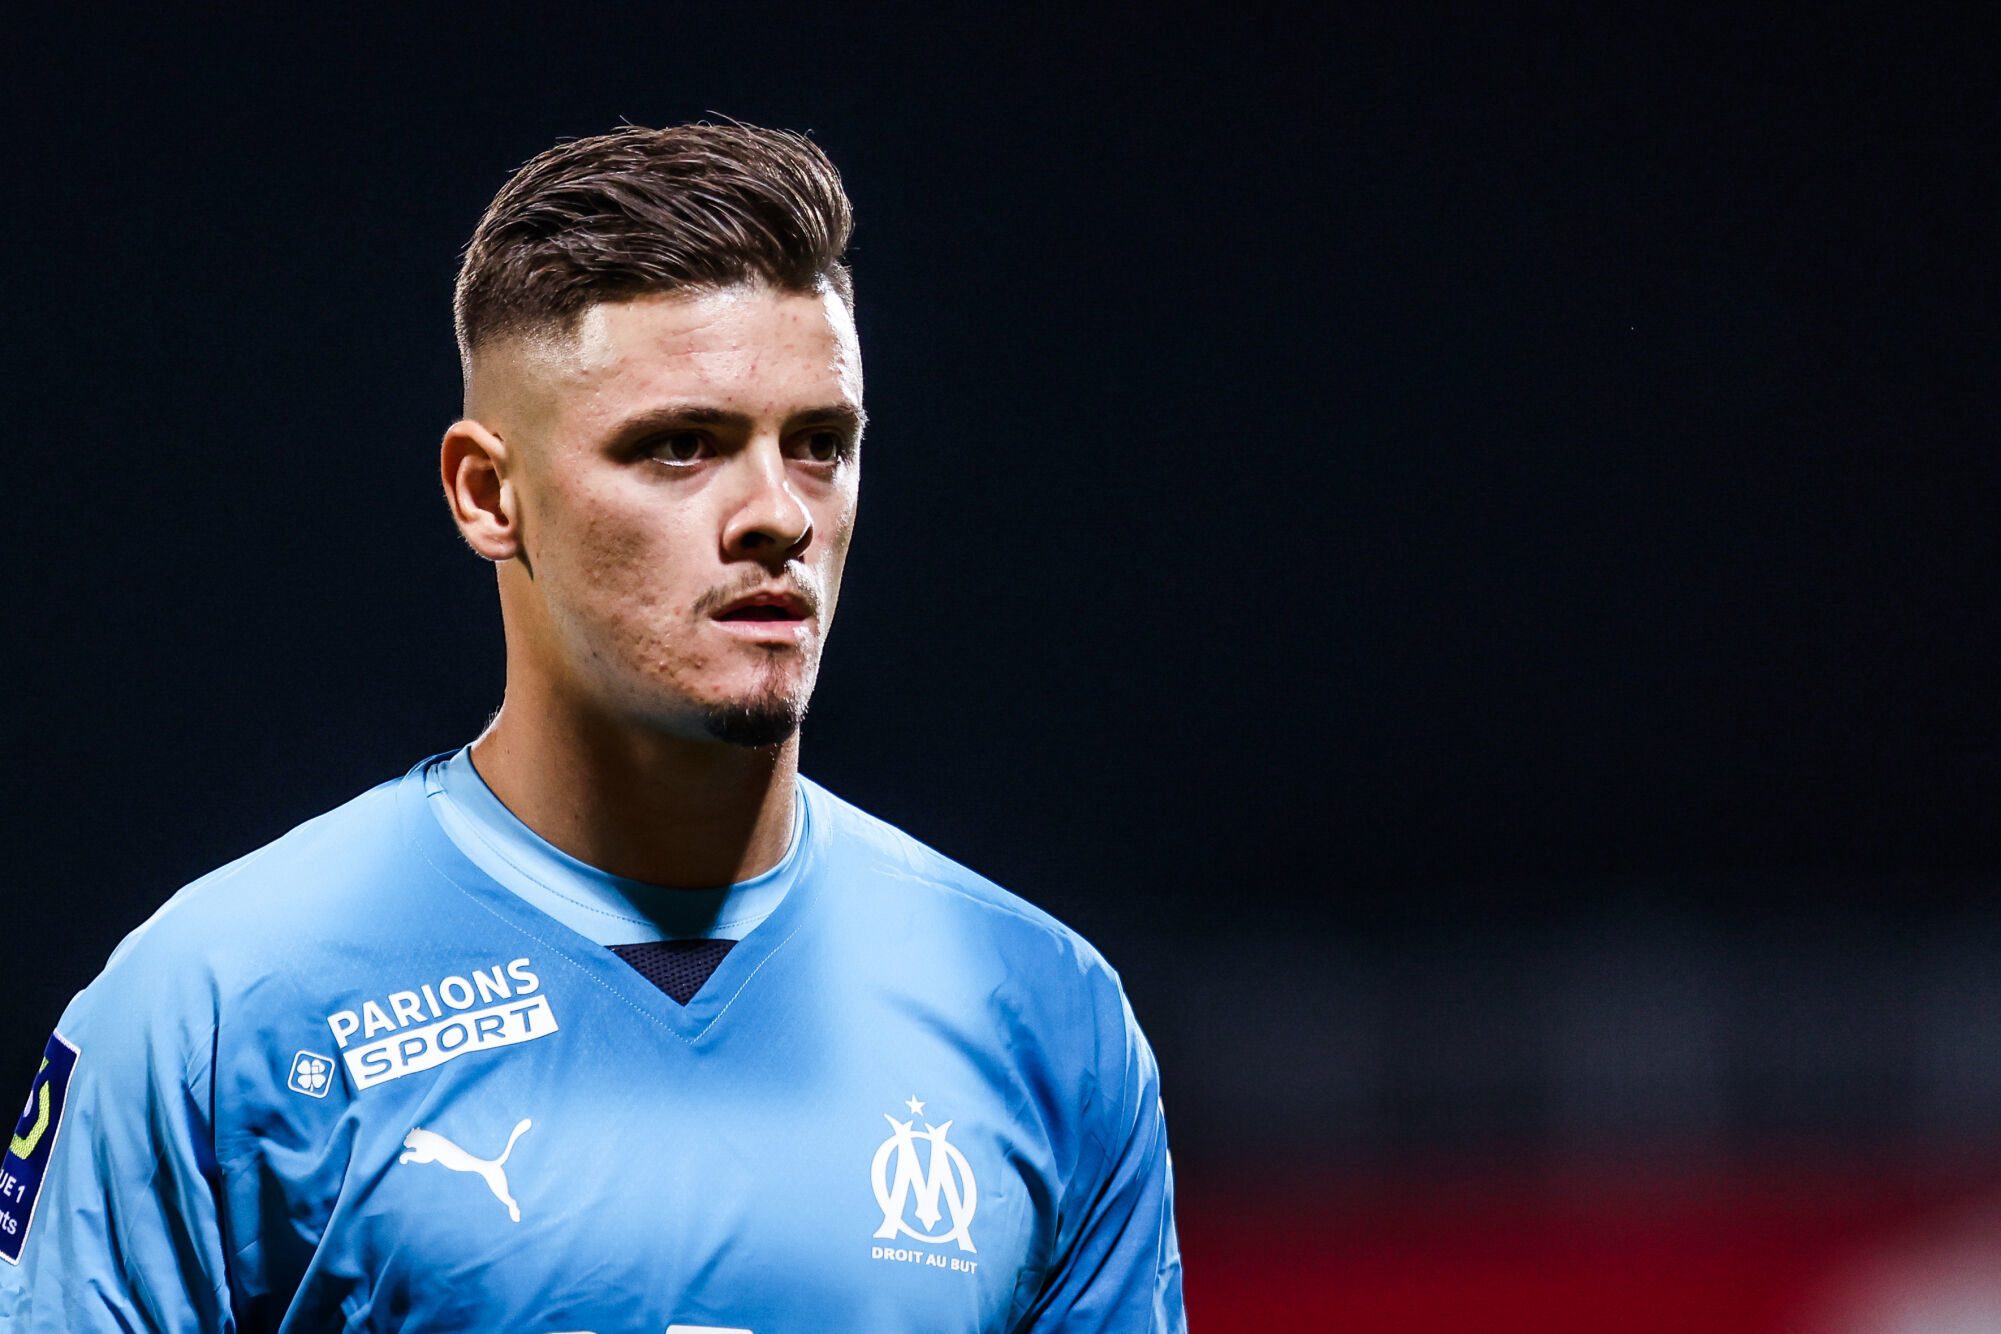 The 10 most expensive recruits in OM history